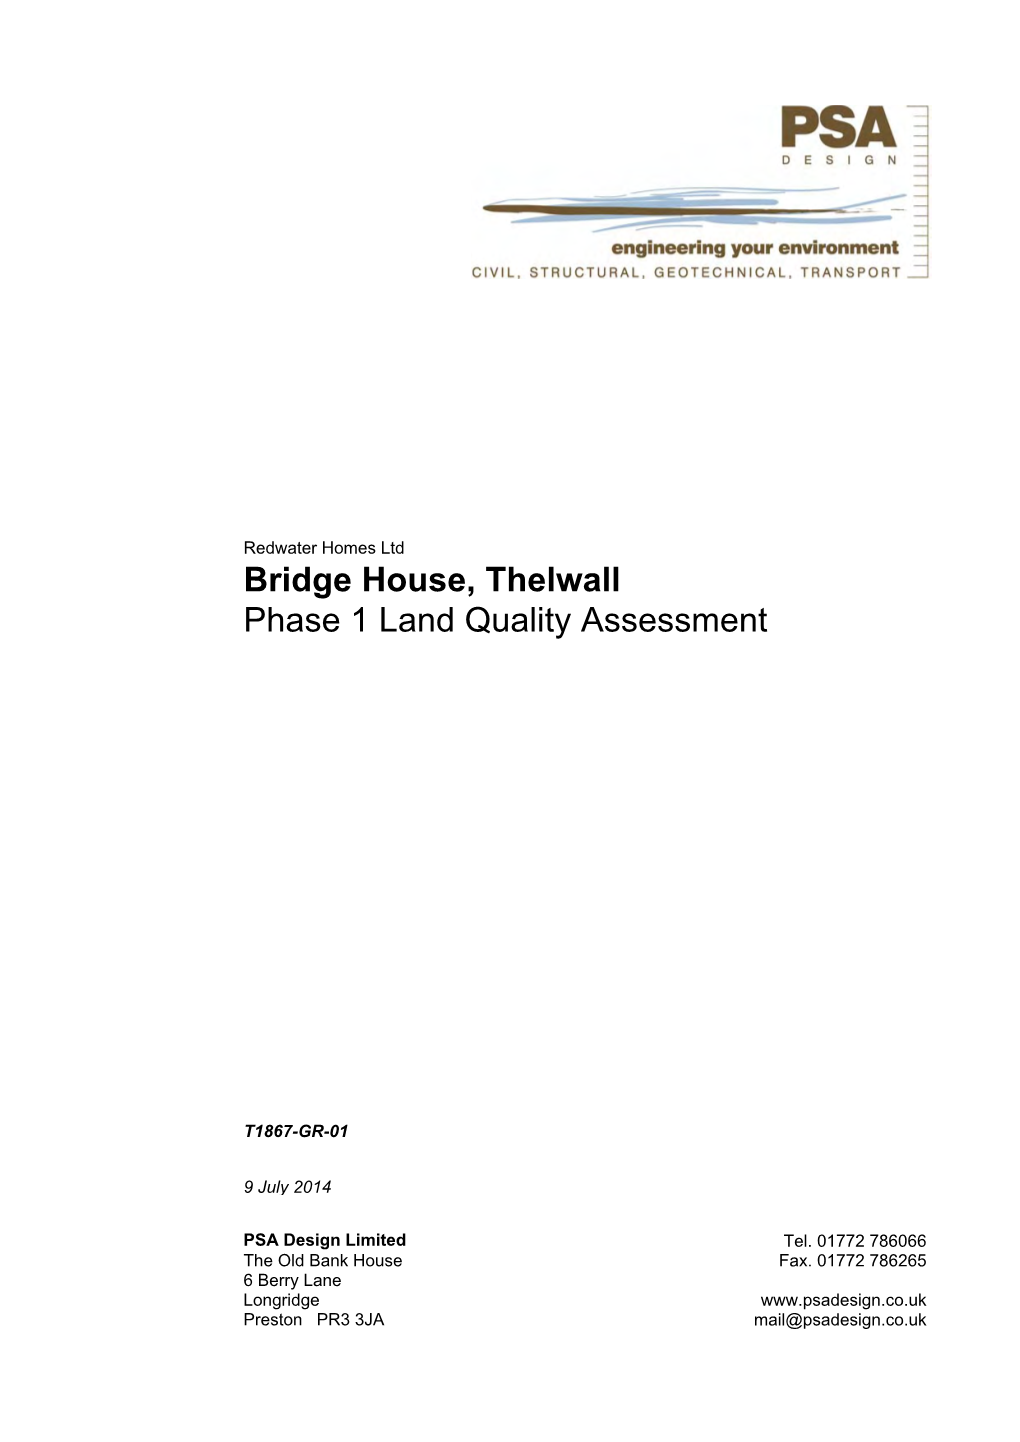 Bridge House, Thelwall Phase 1 Land Quality Assessment